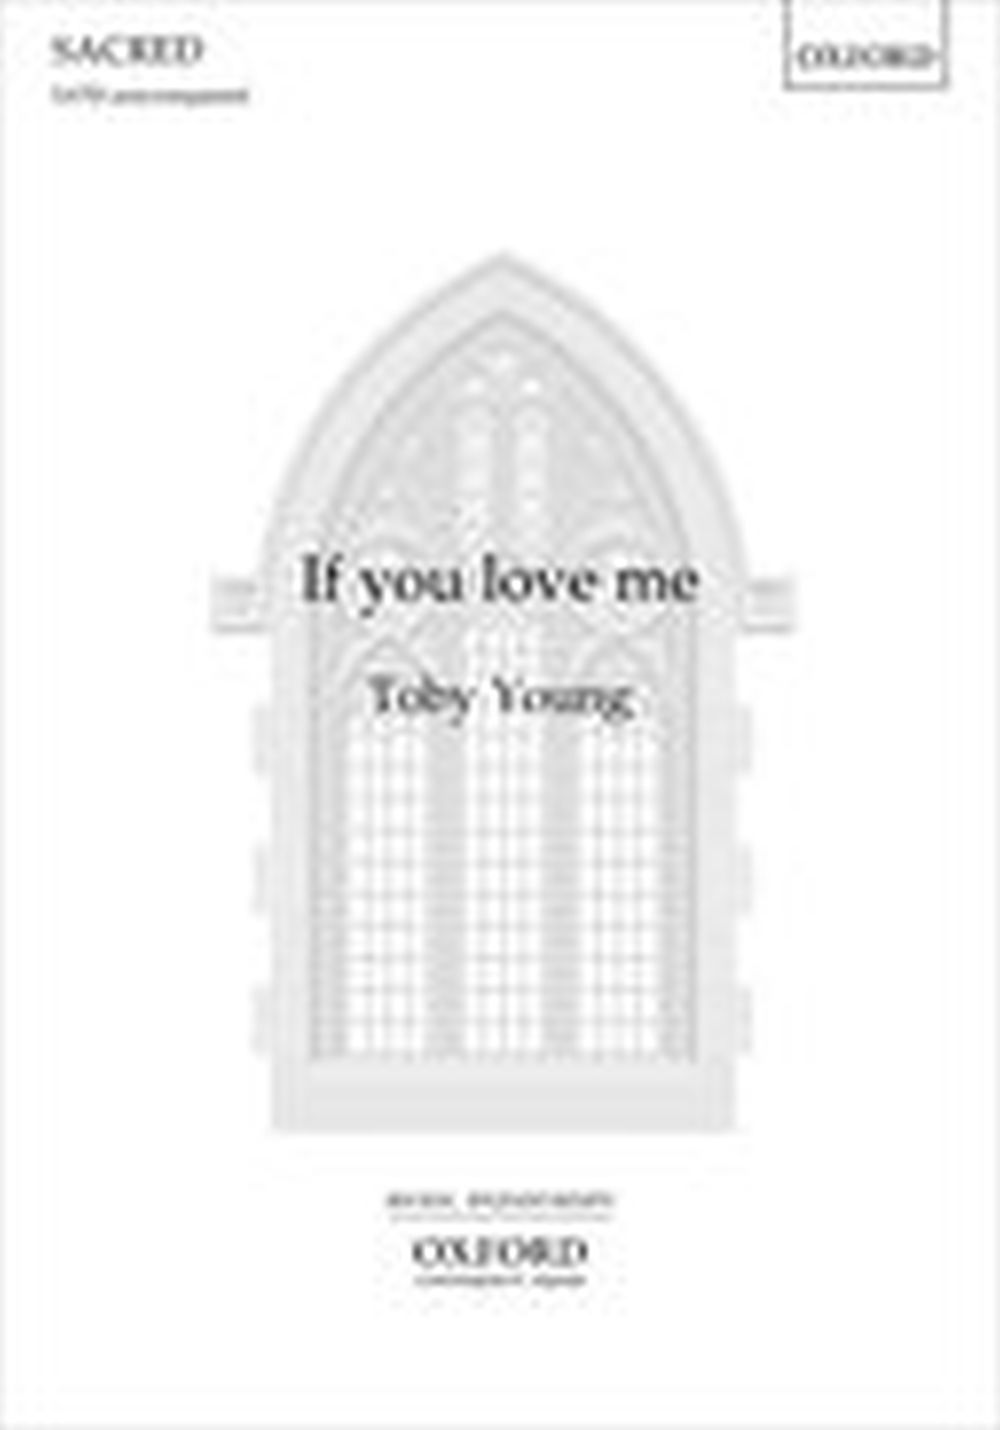 Toby Young: If you love me: SATB: Vocal Score